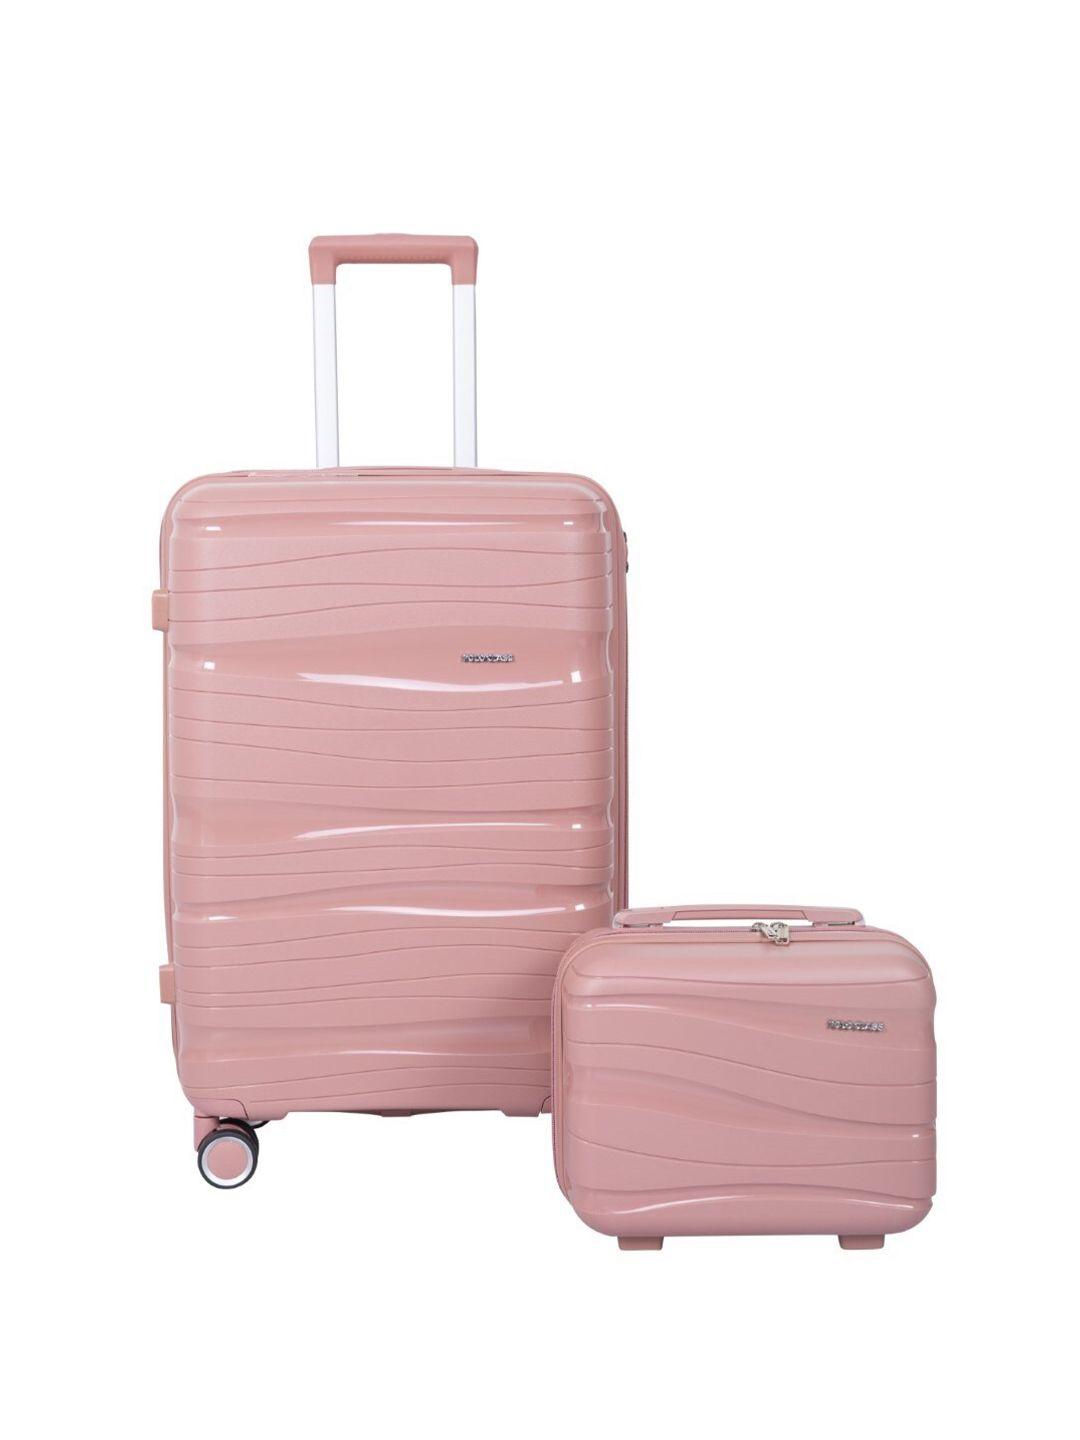 polo class set of 2 hard-sided trolley suitcase with vanity bag 71 cm